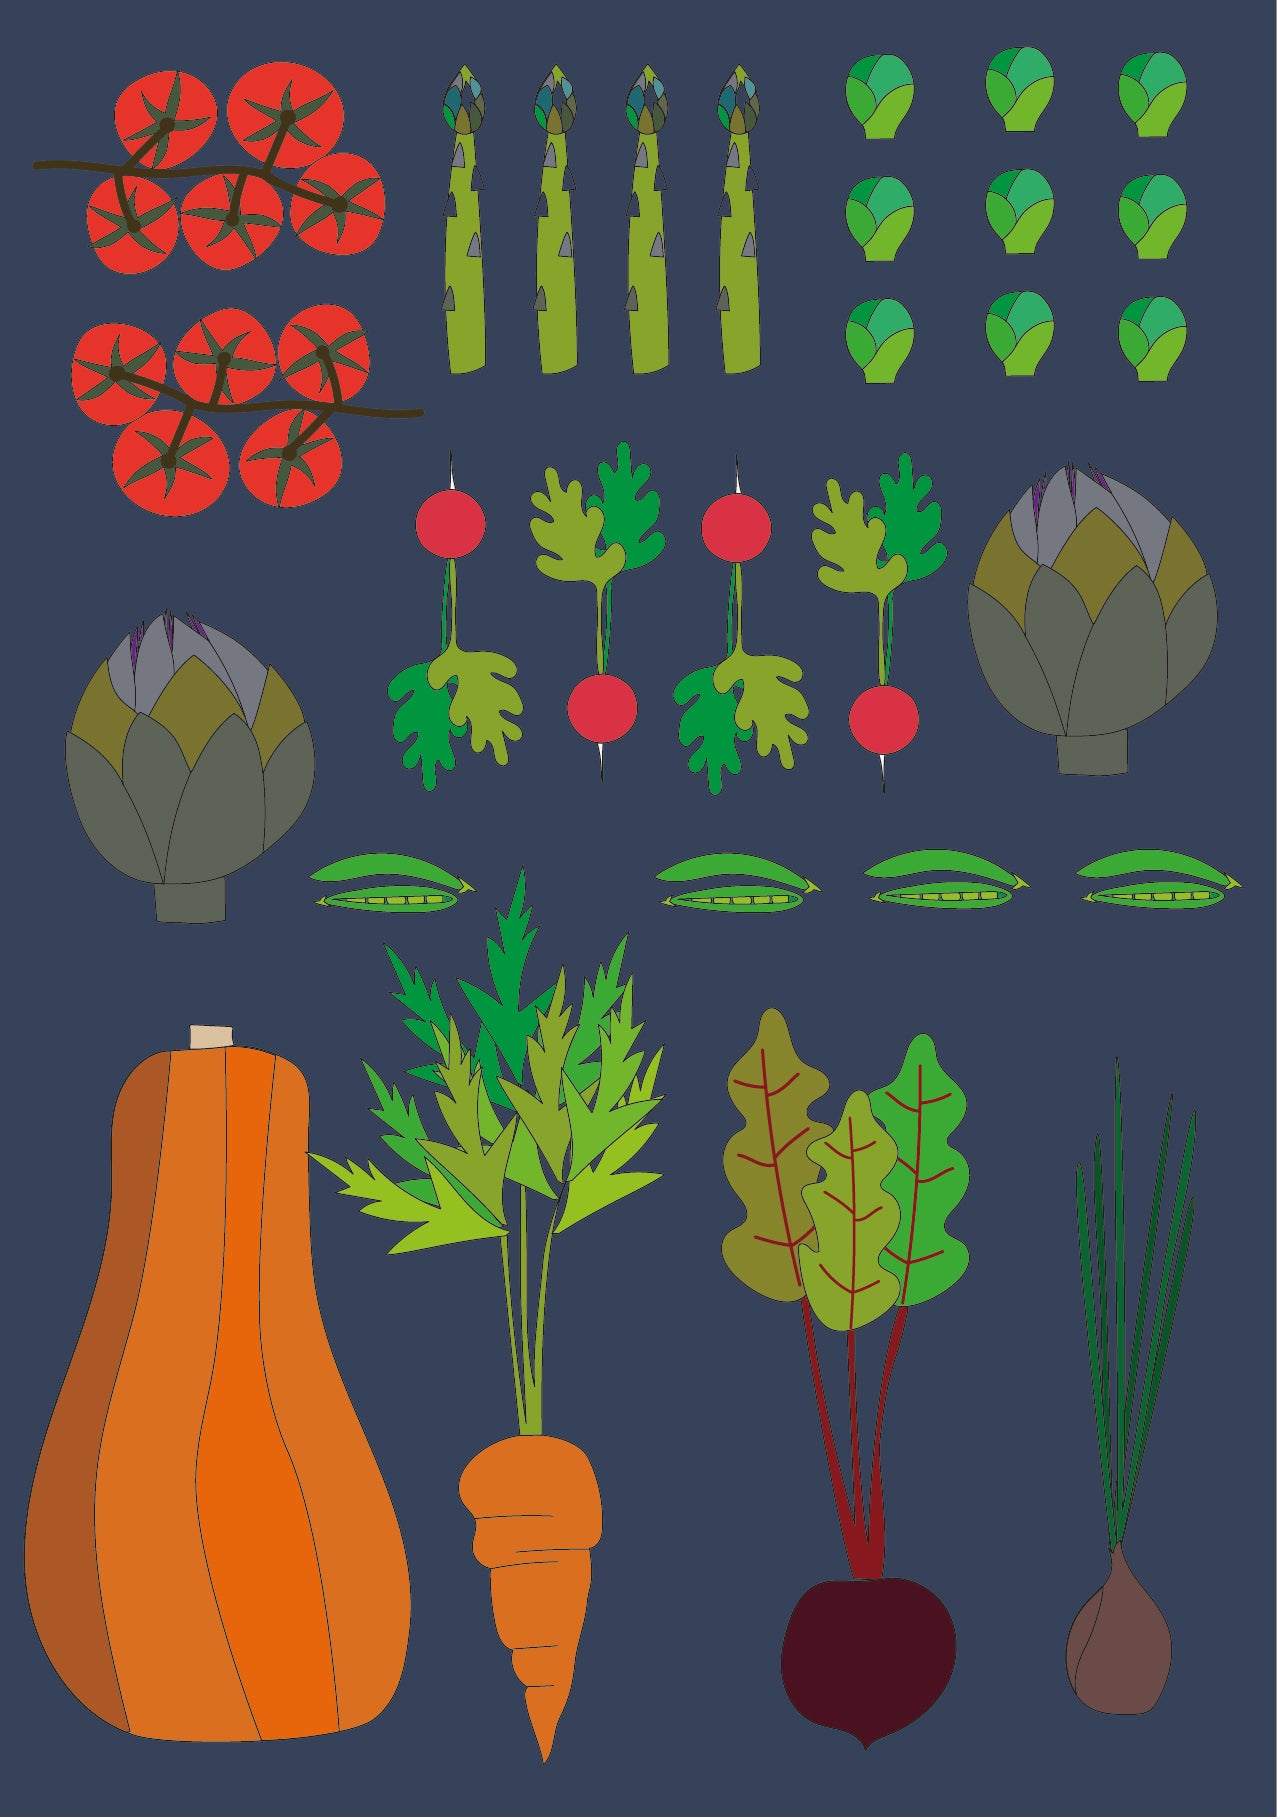 Clipart style cartoon illustration design greeting card with tomatoes, asparagus, peas, radishes, beans, carrots, beetroots, onions on top of a dark blue background. Possible tags for this image could include greeting card, celebration, festive, vegetables, cartoon, and occasion.